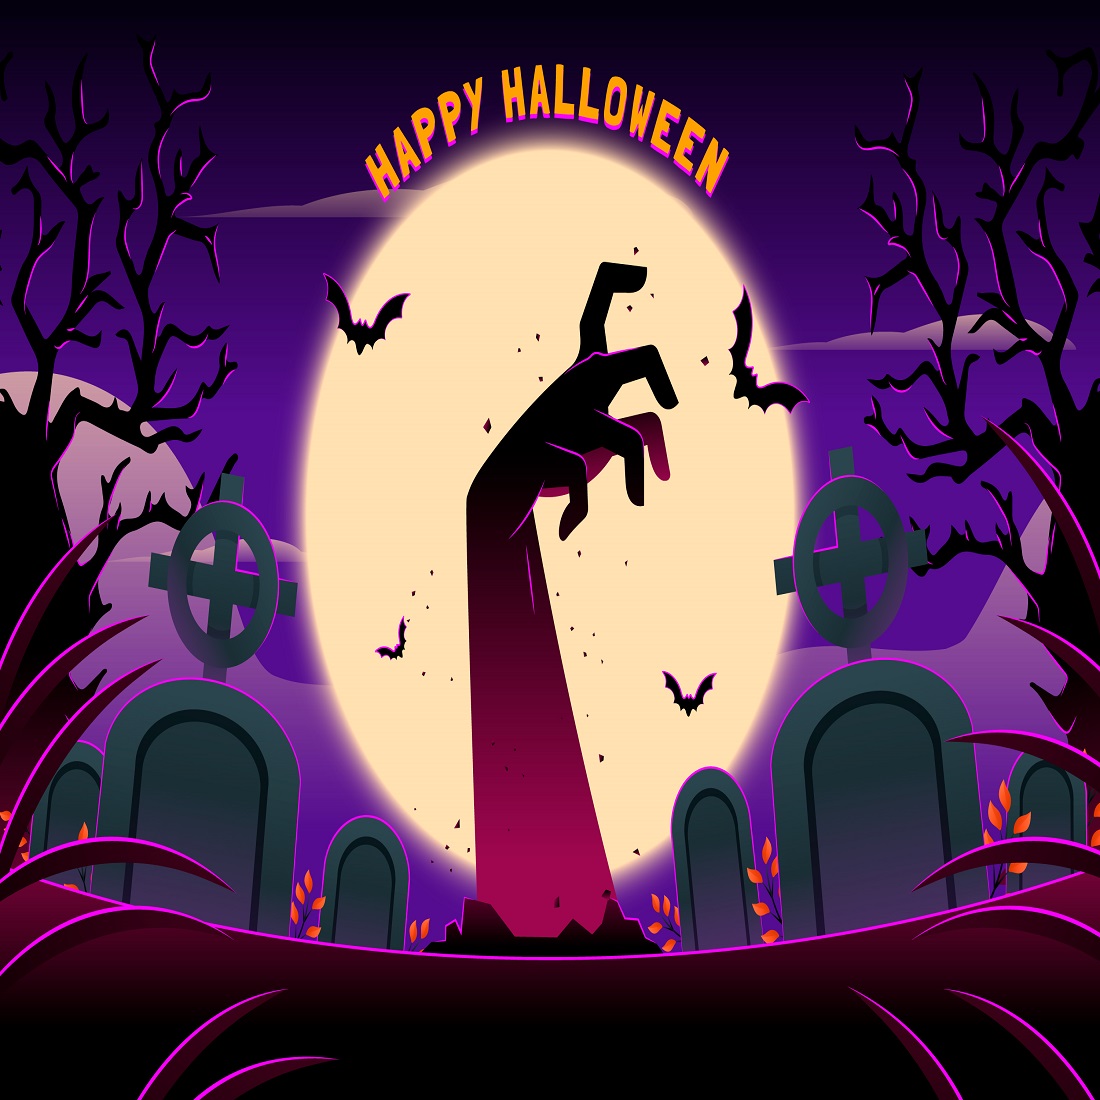 Happy Halloween celebration background preview image.